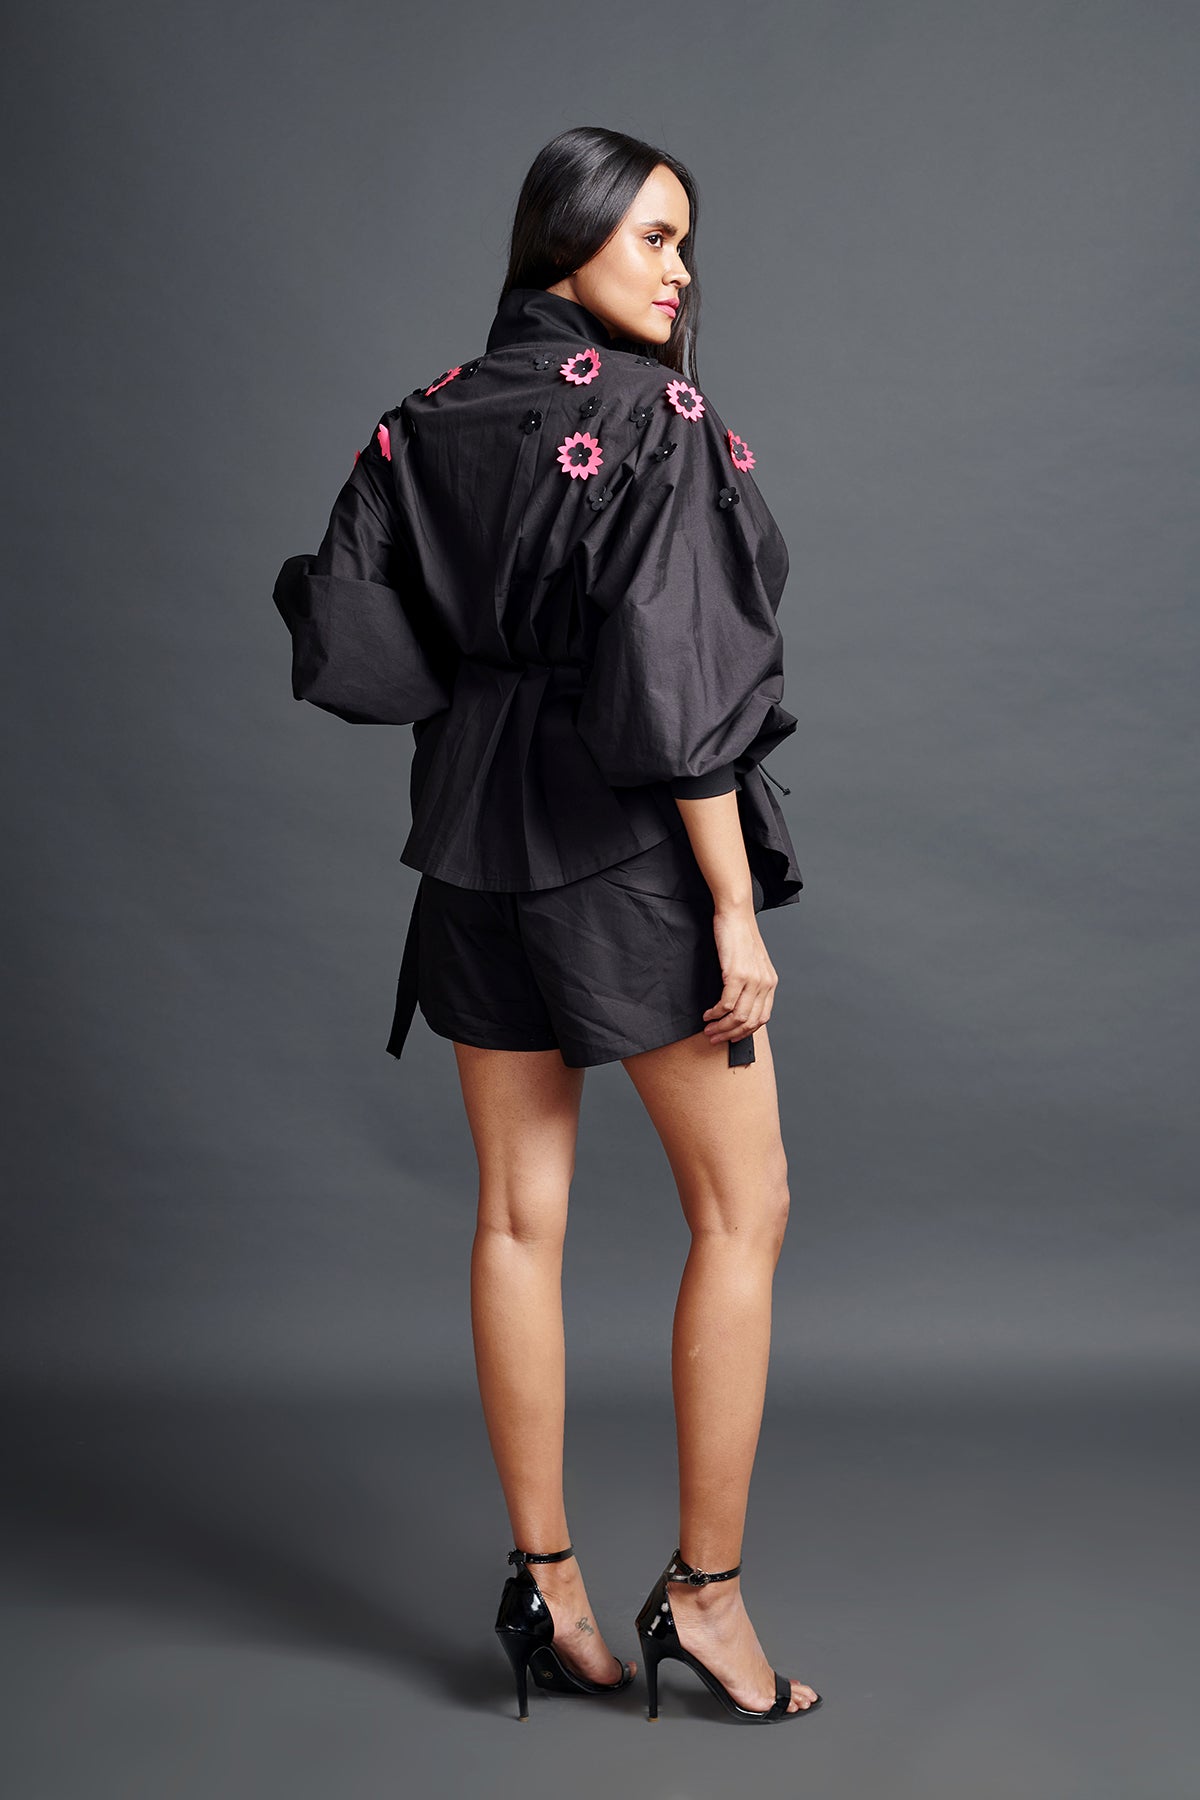 Image of BLACK SHIRT IN COTTON BASE WITH PLEATED CONFETTI DETAIL. IT IS PAIRED WITH MATCHING SHORTS. From savoirfashions.com